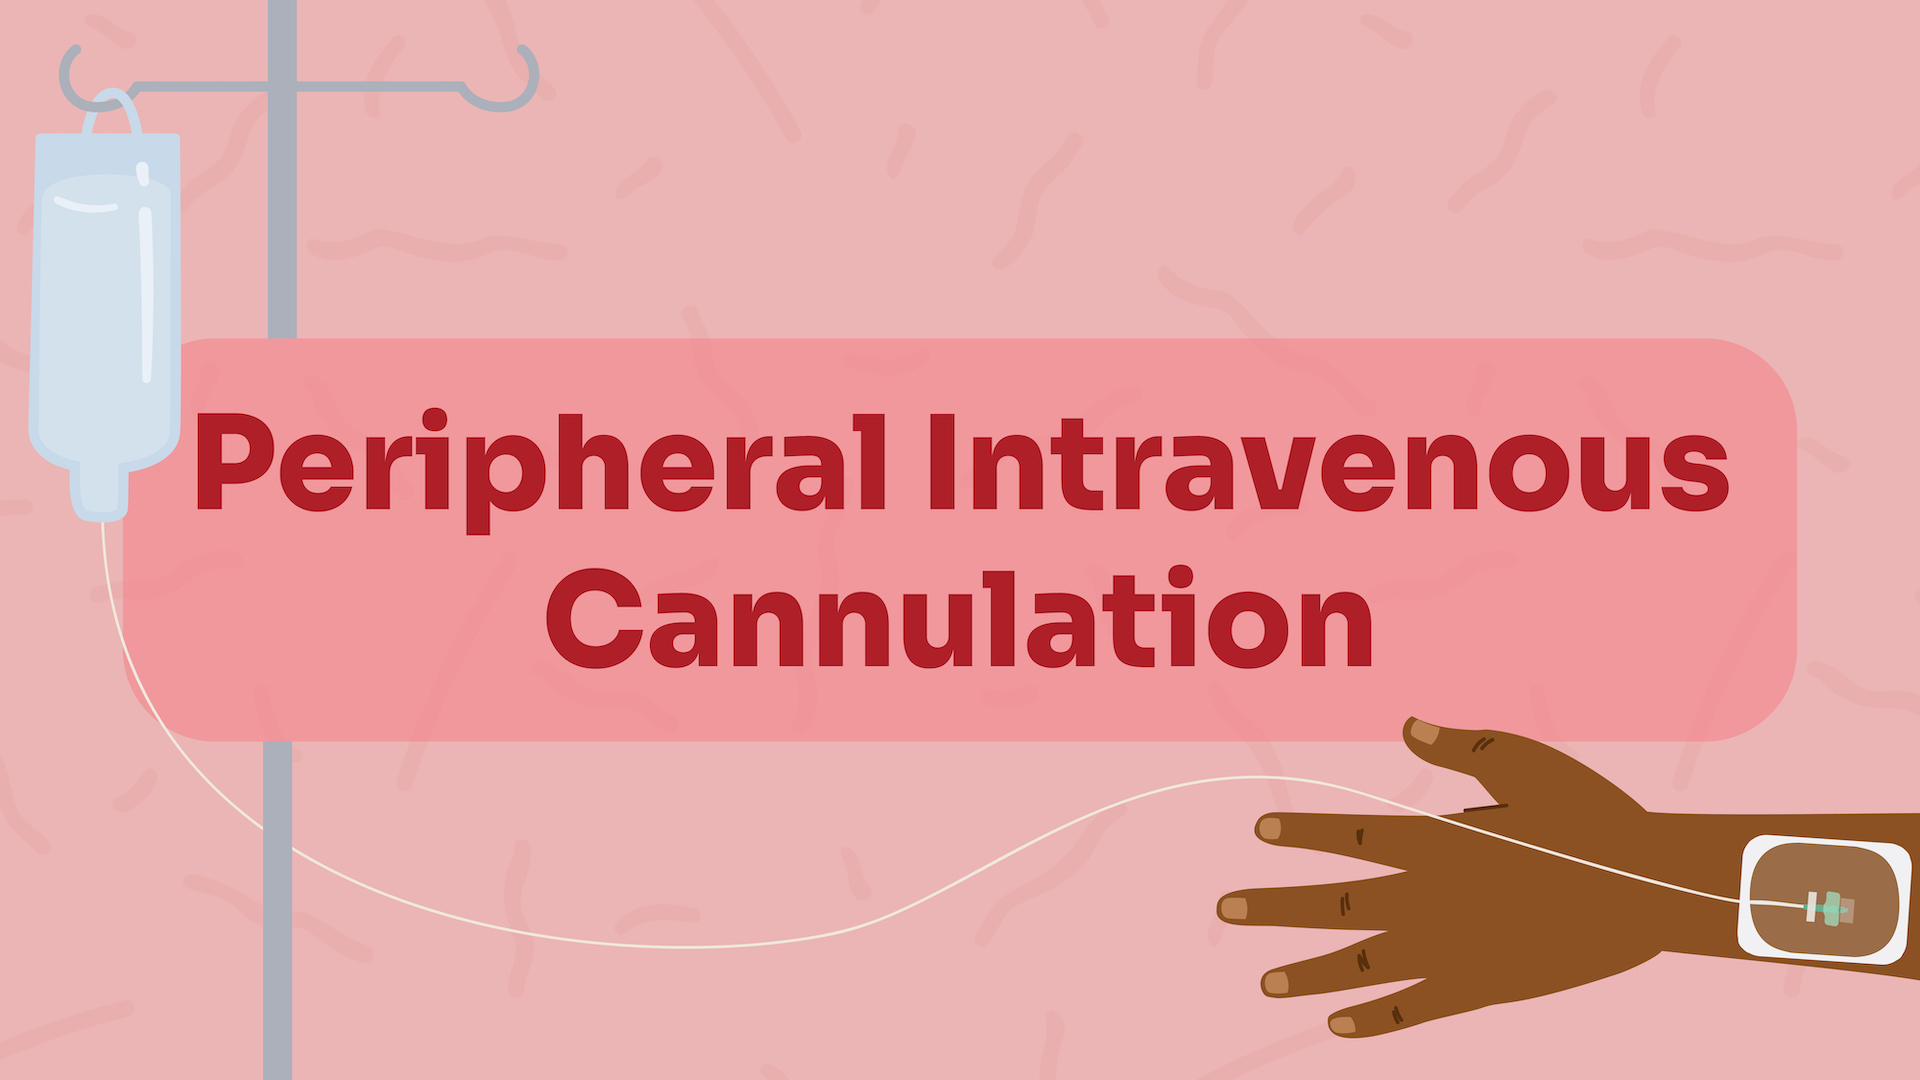 Image for Peripheral Intravenous Cannulation